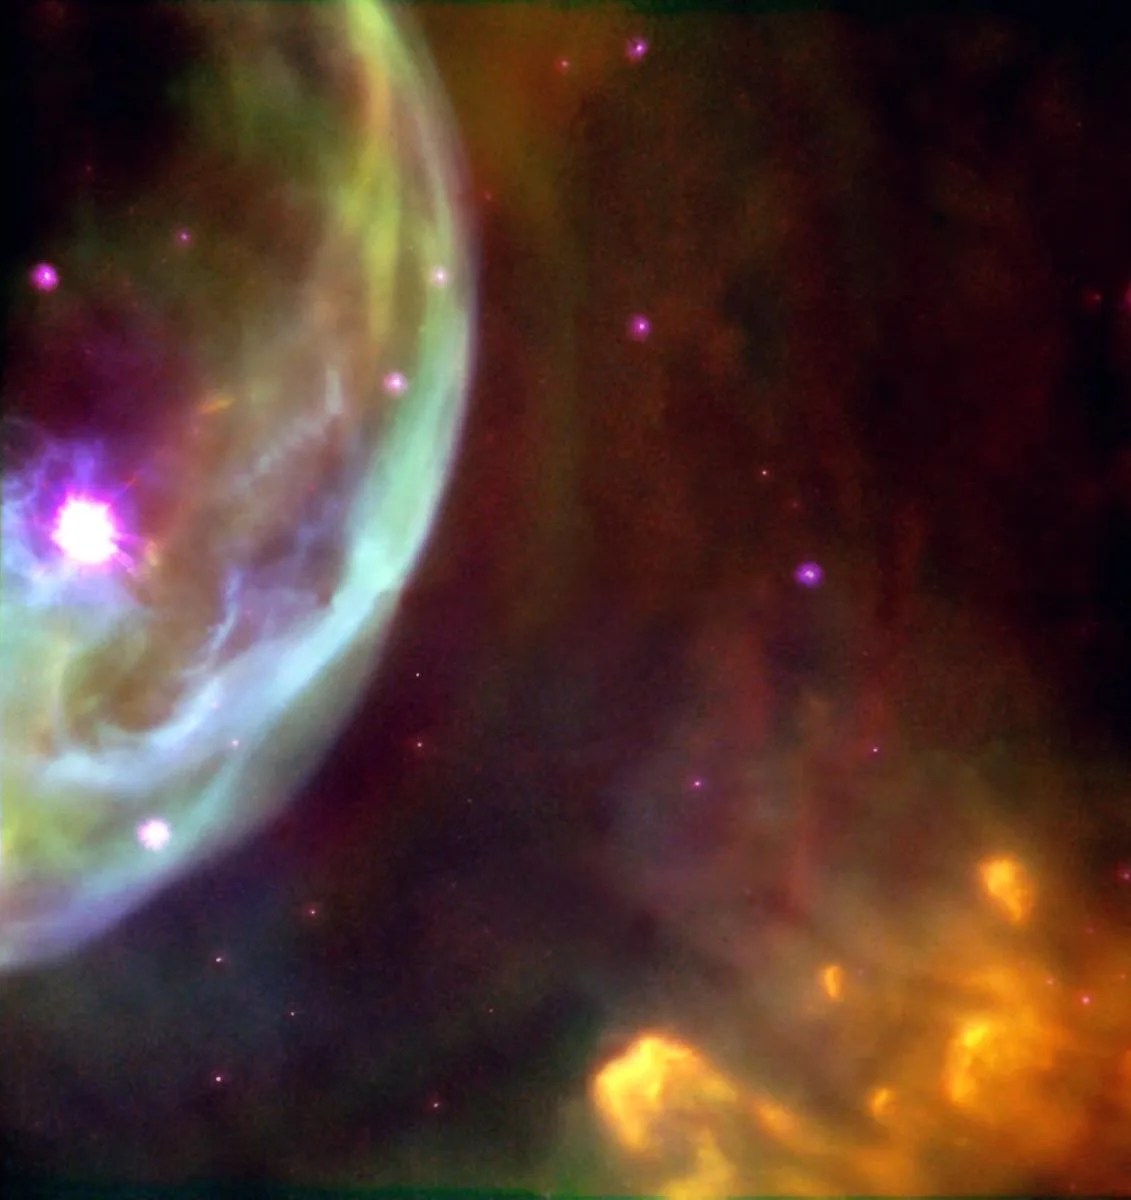 On the top left of the image, light blue dust and gas surrounds a purple star. At the bottom right, delicate filaments of dust.